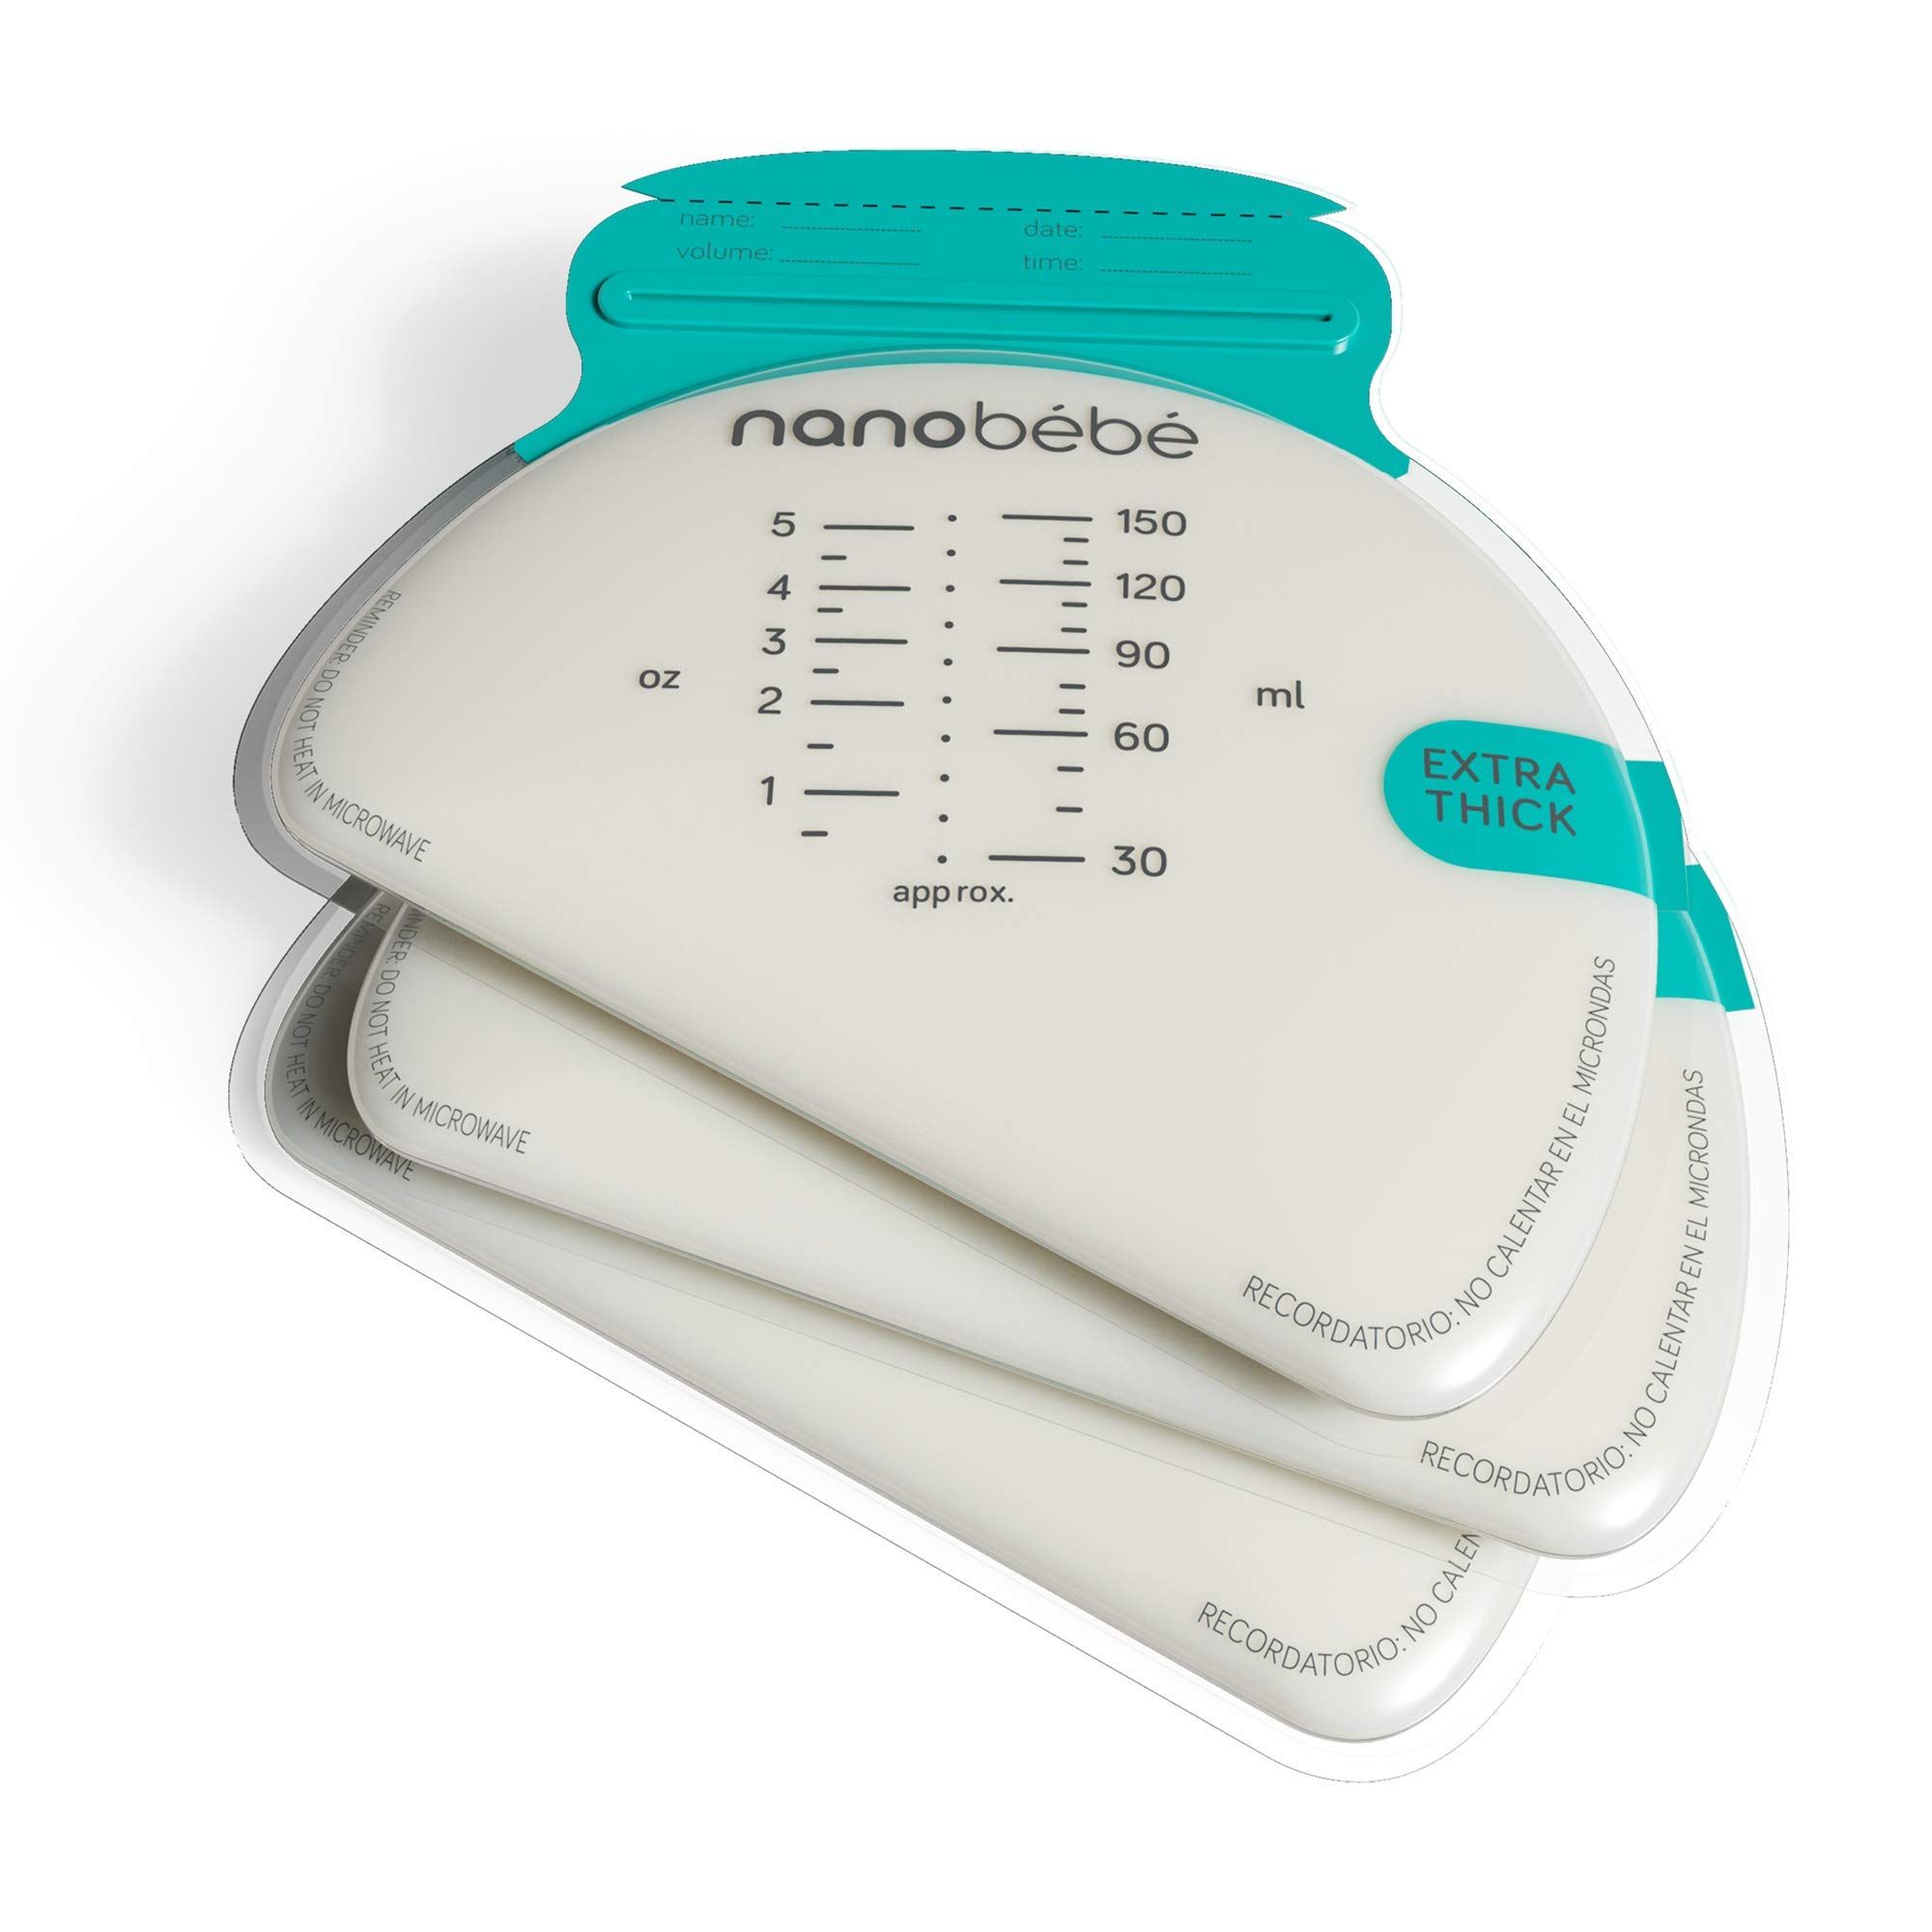 Nanobébé 50 Breastmilk Storage Bags - Cools & Thaws Evenly 2X Faster, to Protect nutrients Refill Pa | Amazon (US)